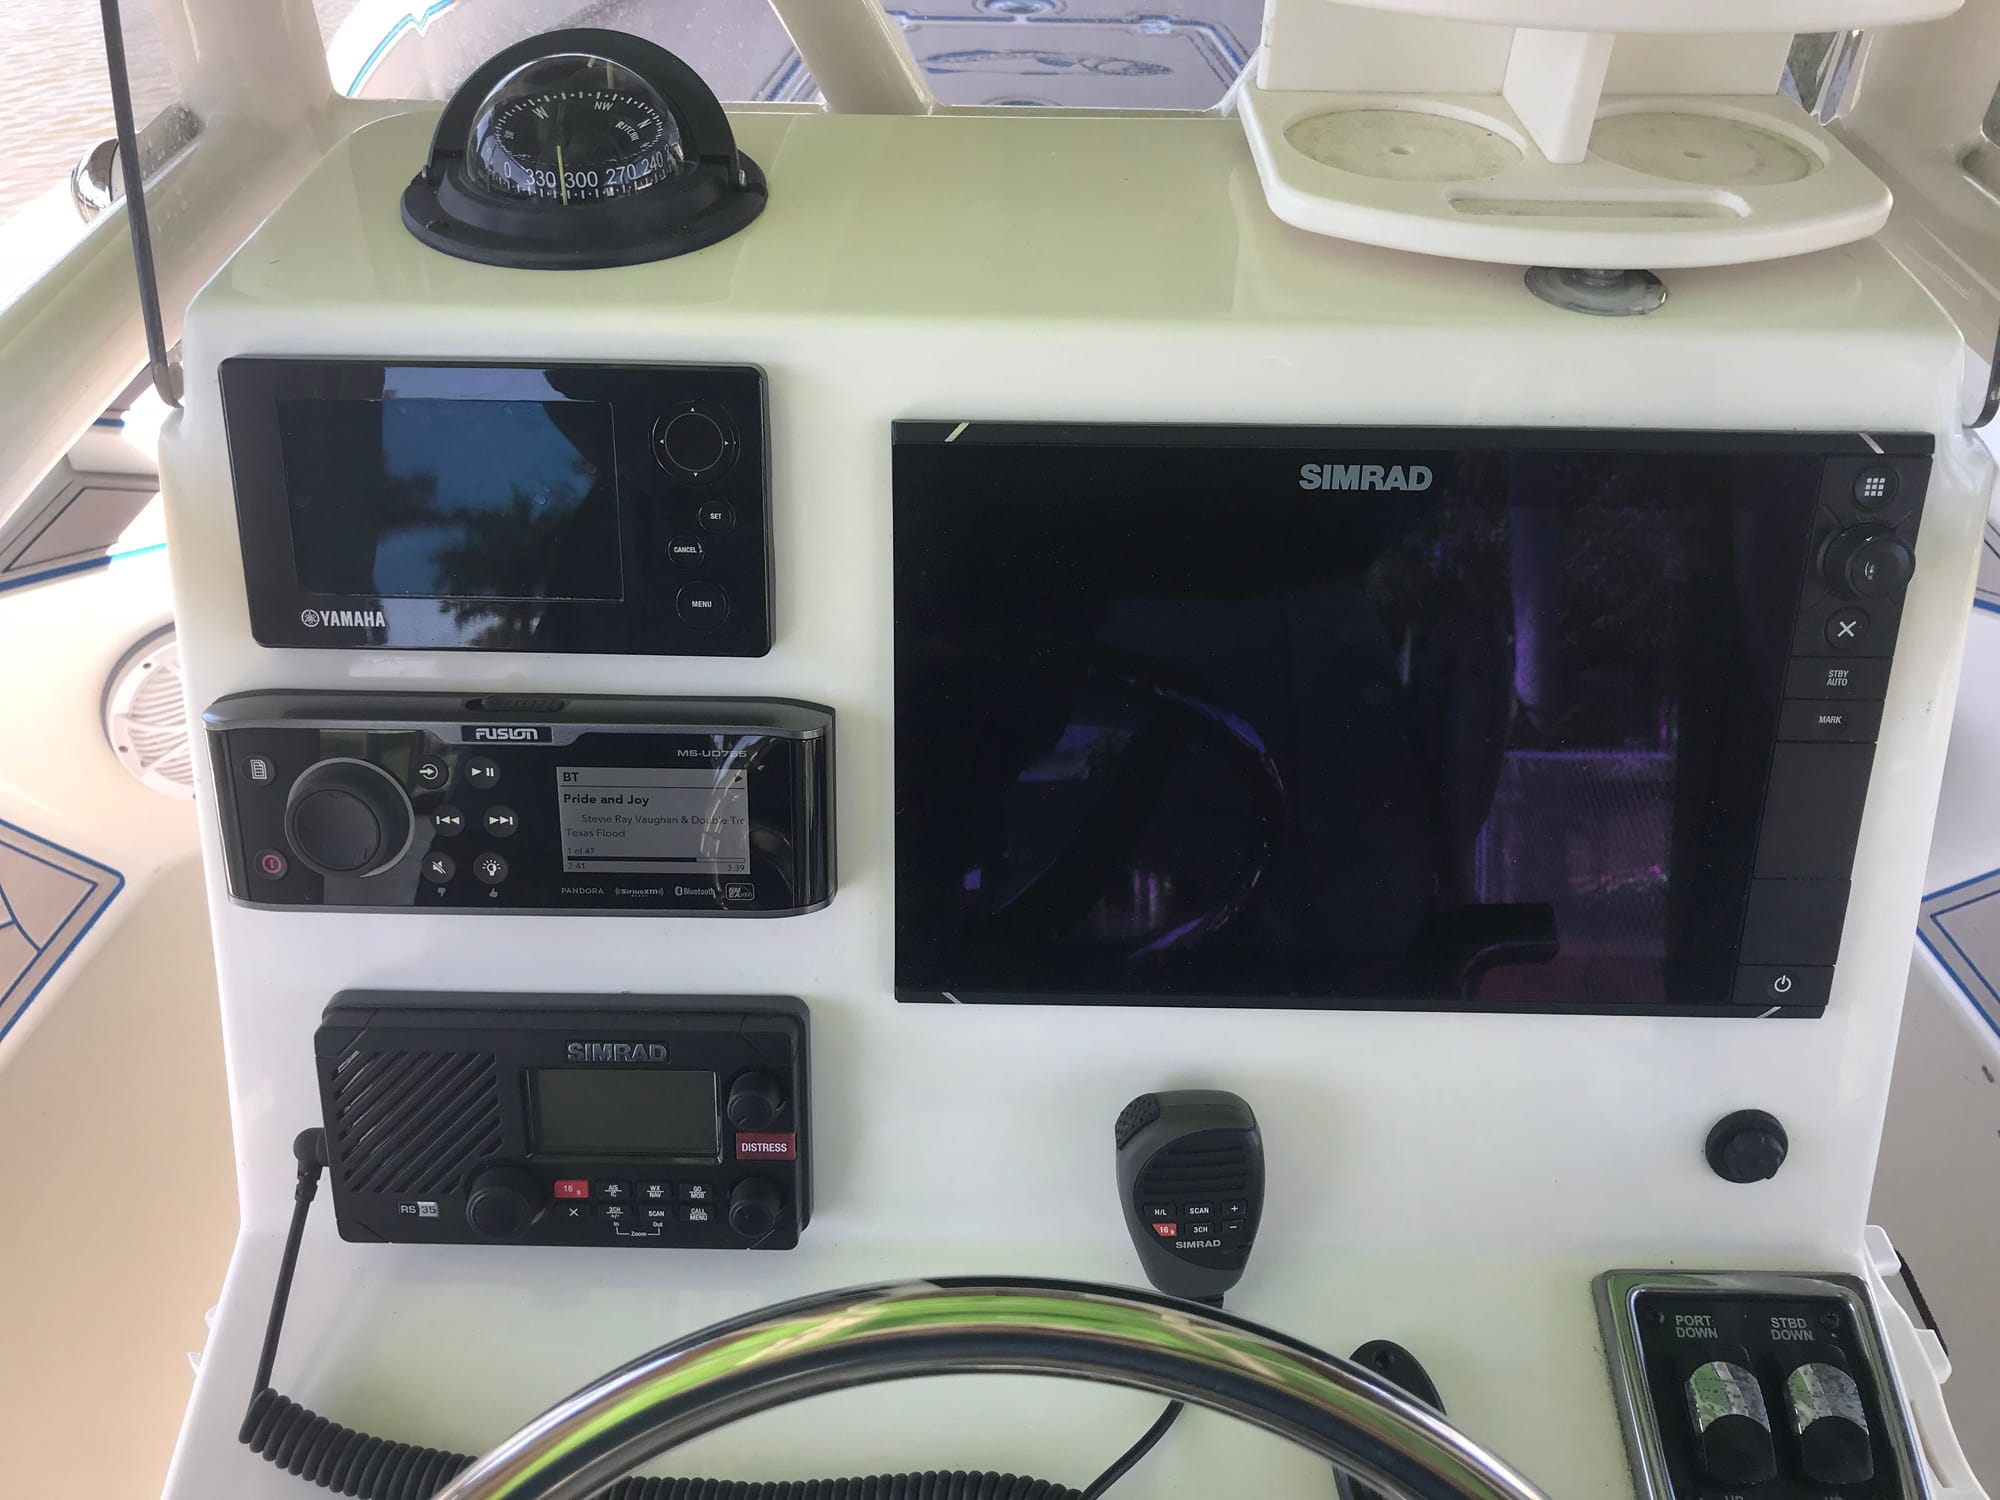 Fusion Garmin Warranty Experience The Hull Truth Boating And Fishing Forum